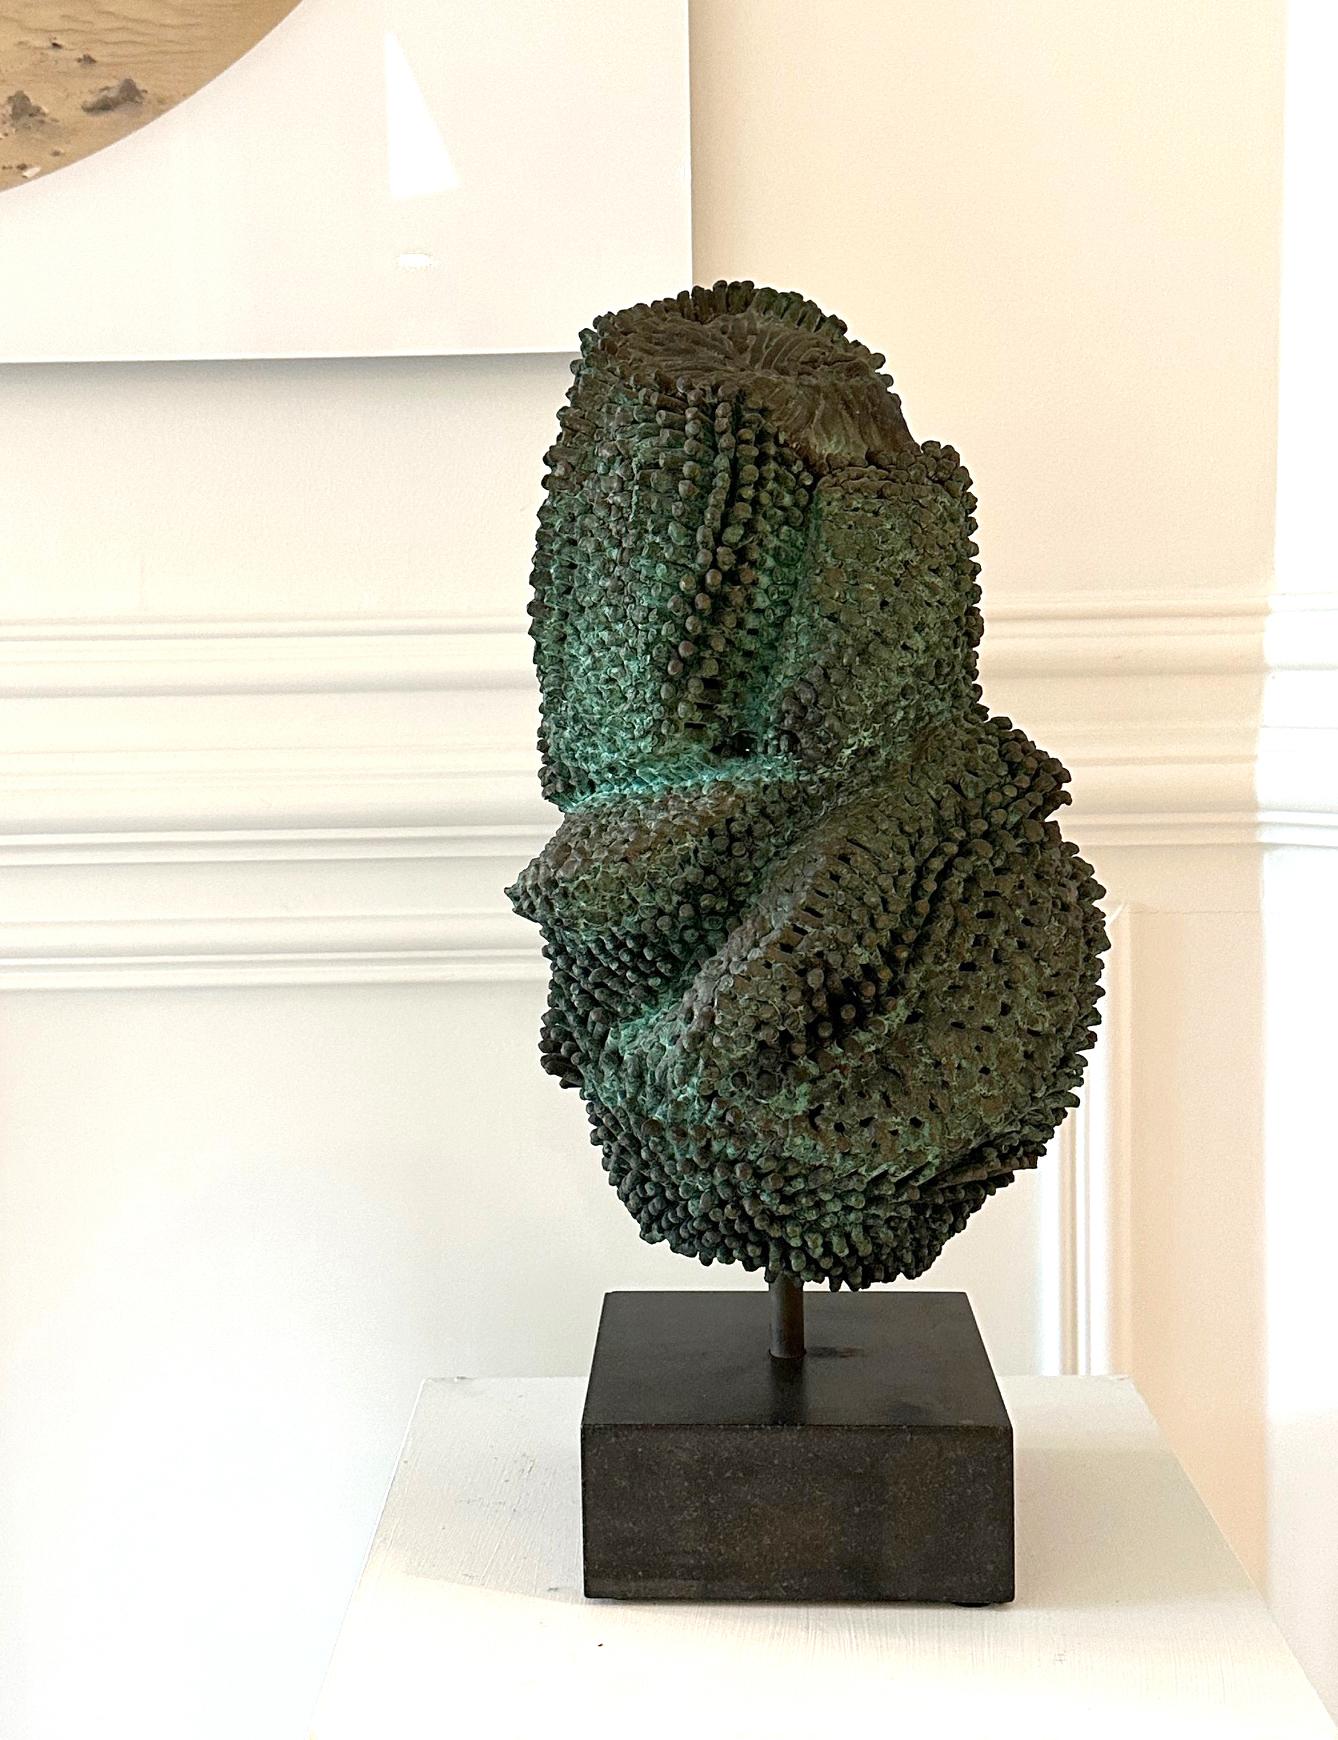 A unique bronze sculpture displayed on a granite stone base circa 1973 by Harry Bertoia (1915-1978), the celebrated Italian-born American artist, sculptor, and designer. The welded and patinated bronze sculpture is highly abstract with a visually